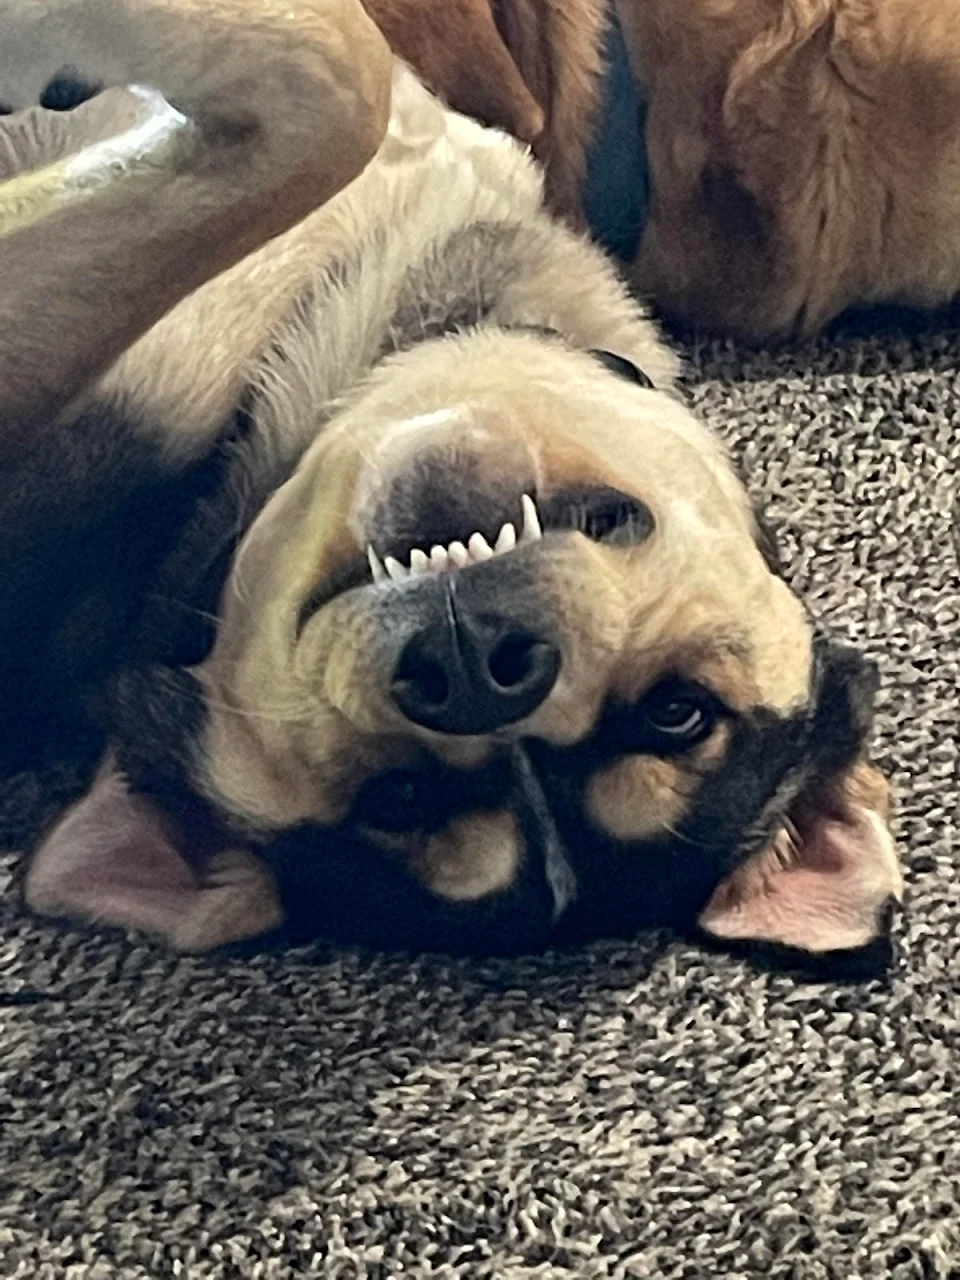 A dog with a overbite